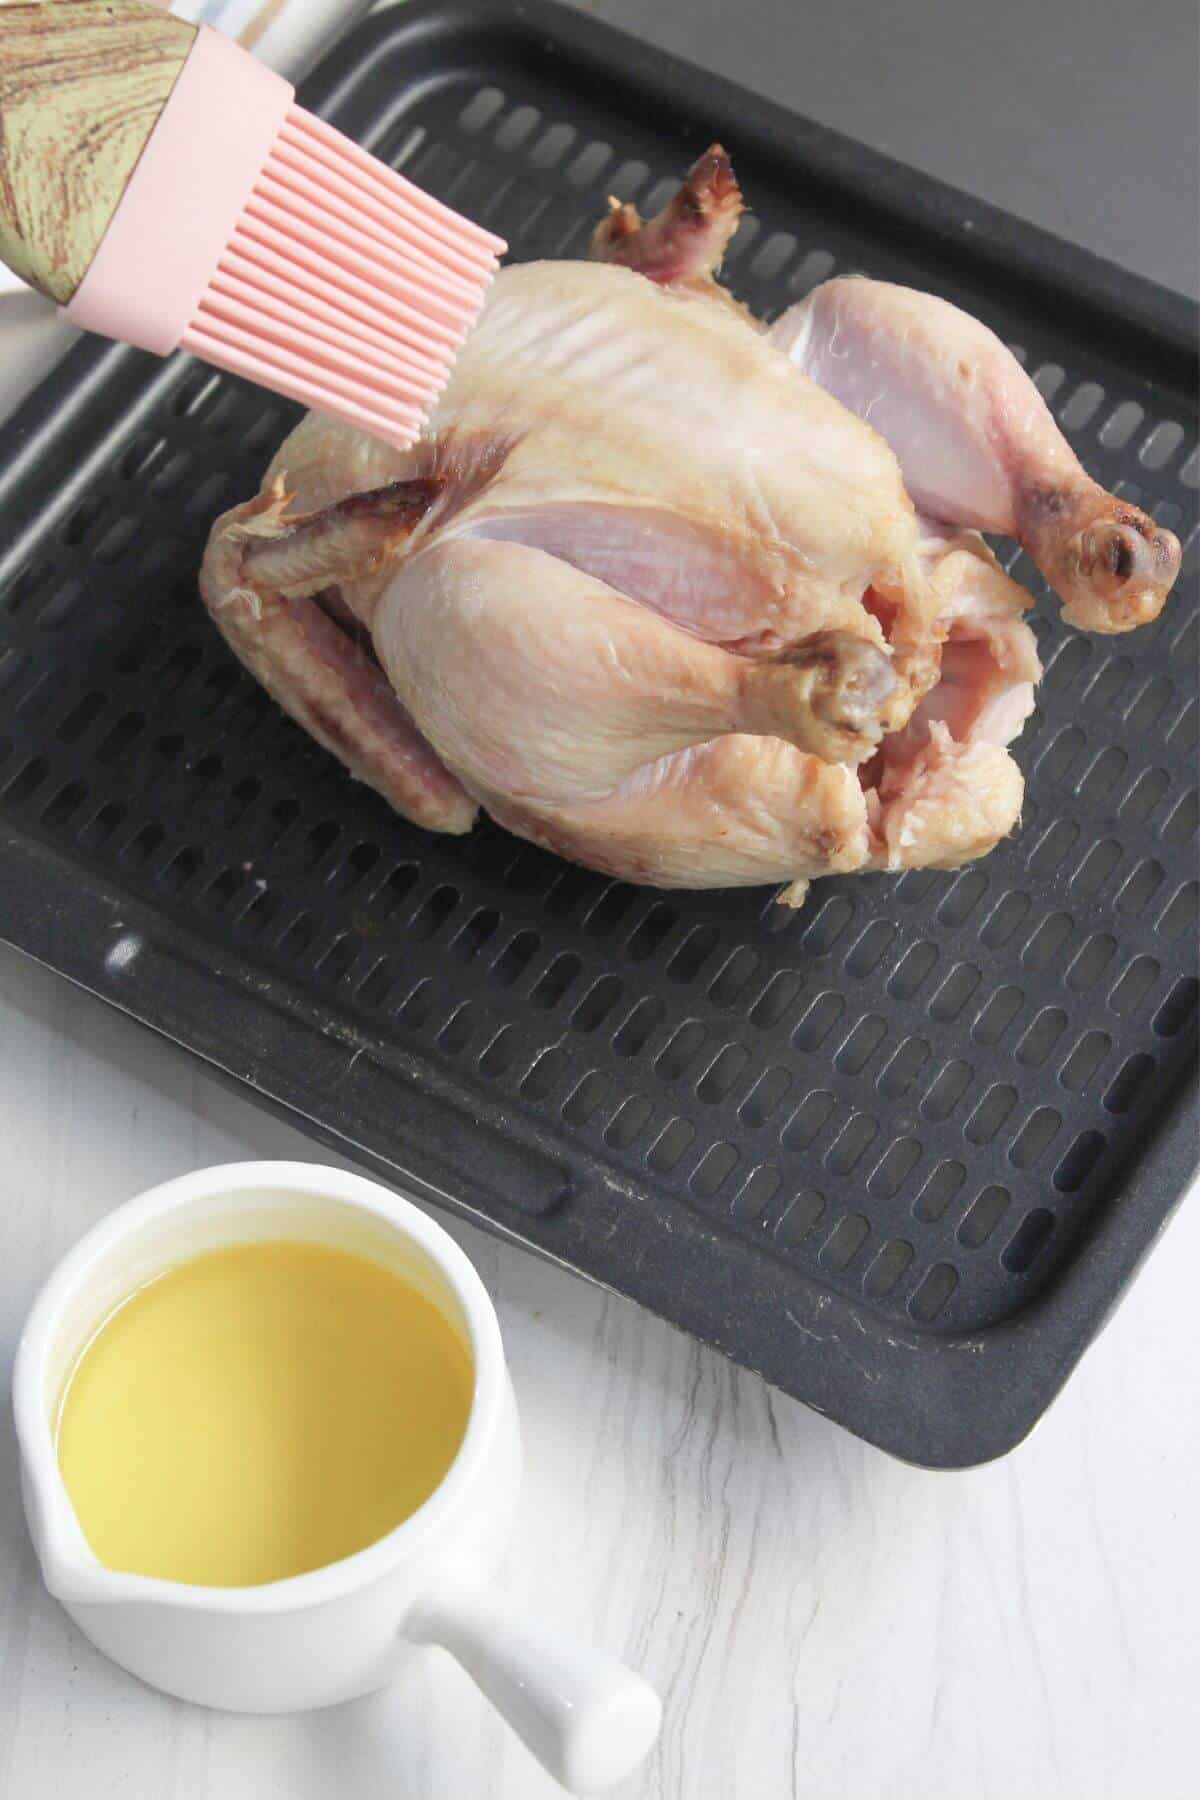 Seasoned cornish hen brushed with oil.